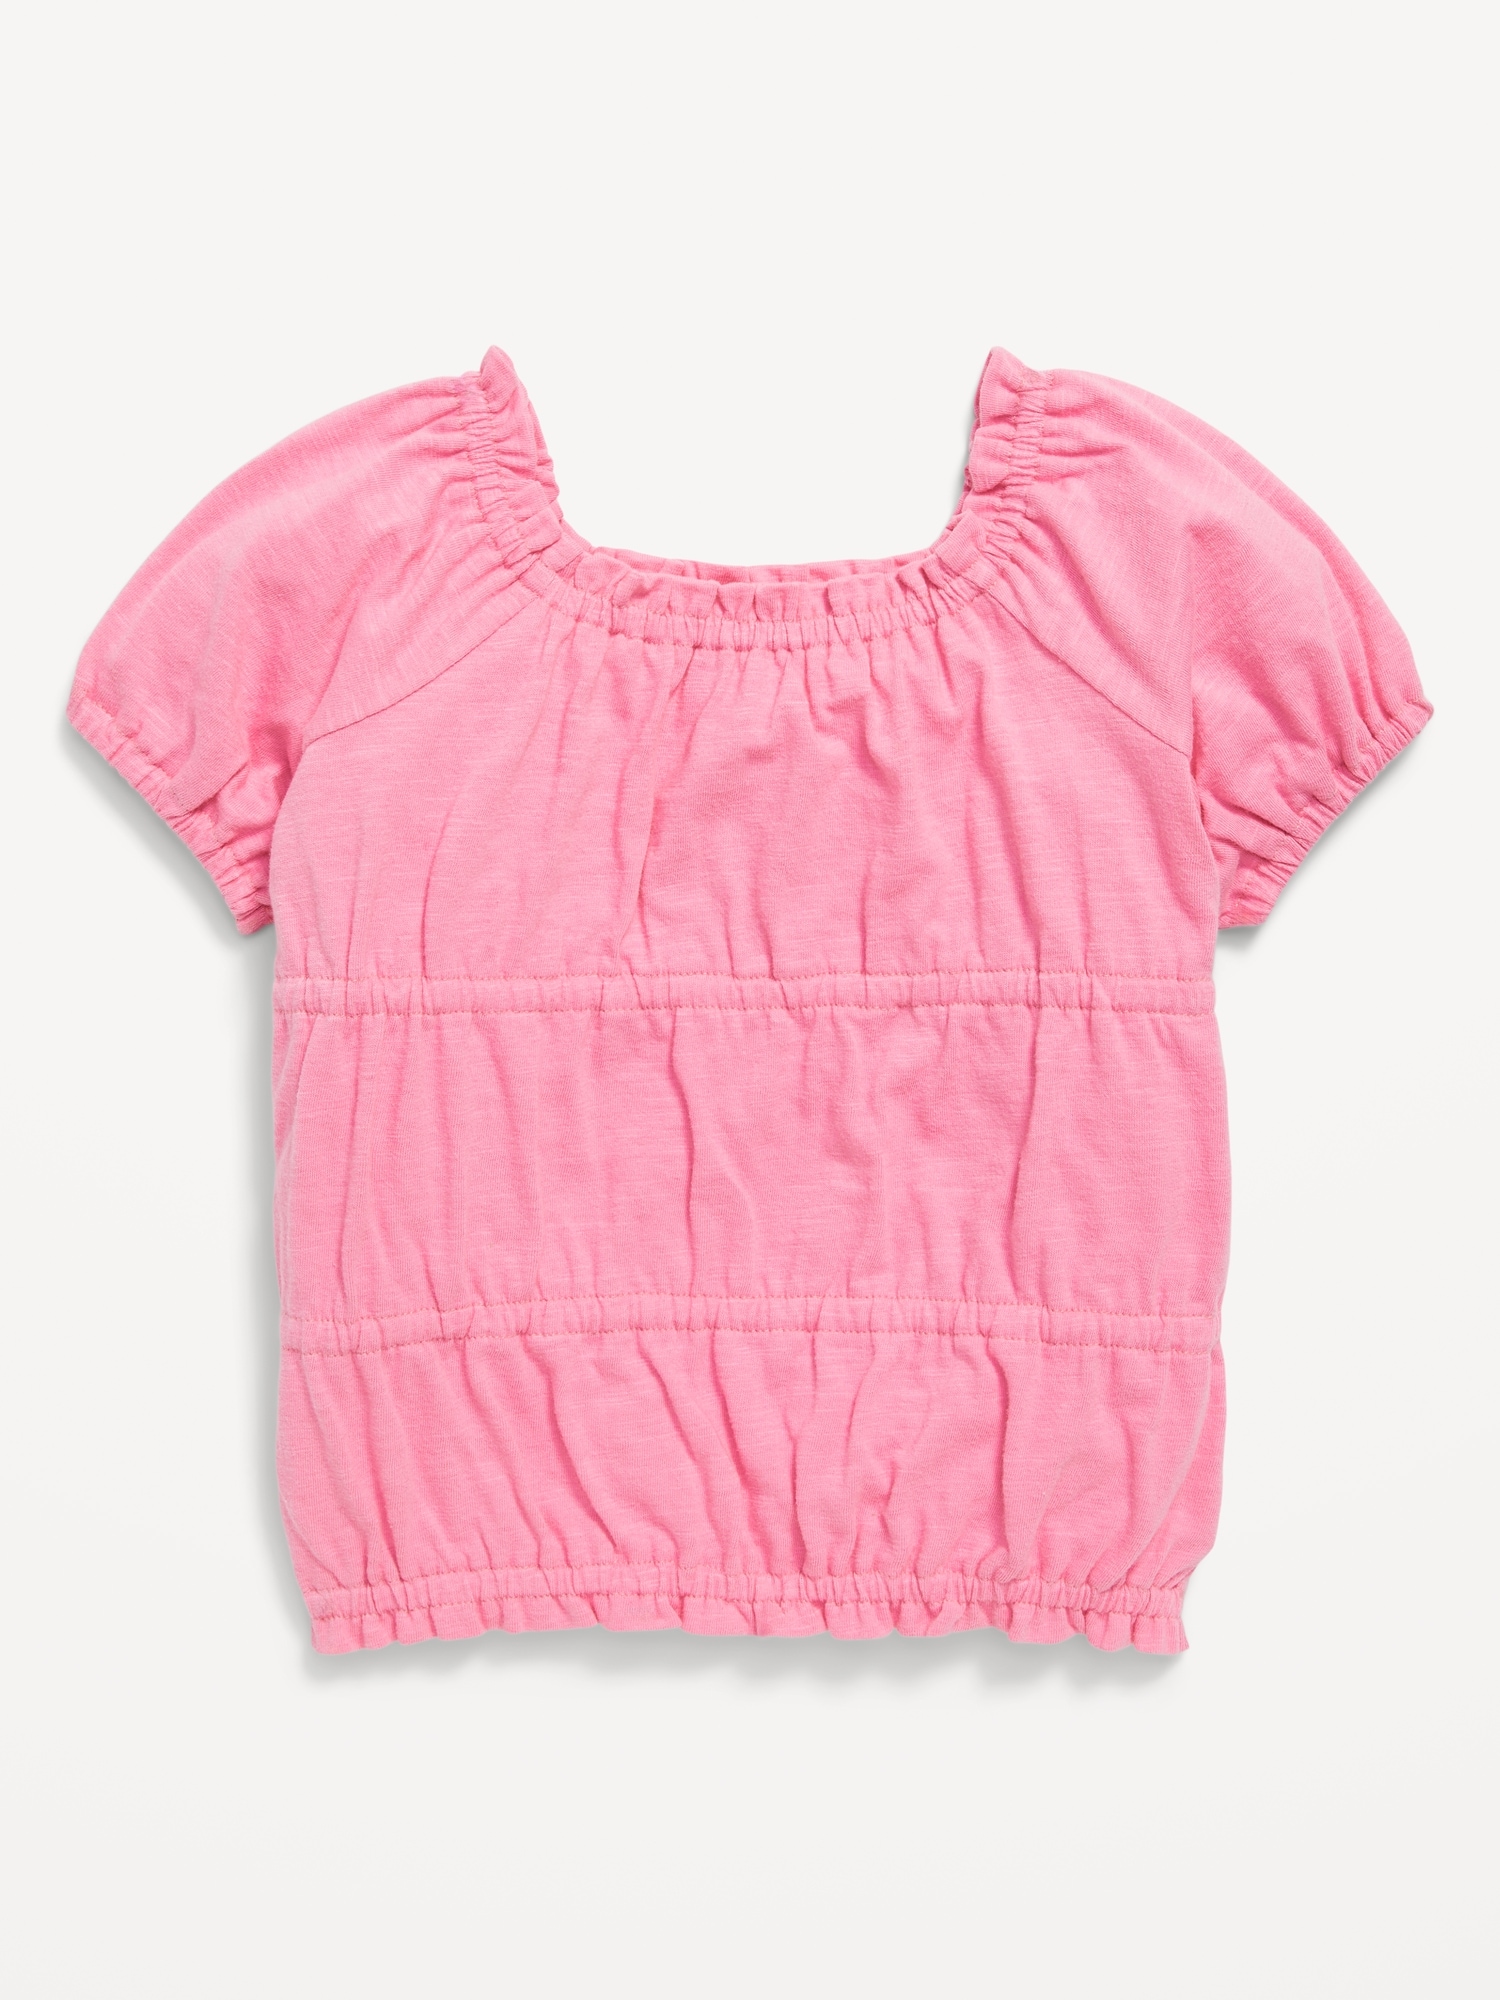 Puff-Sleeve Smocked Top for Toddler Girls Hot Deal